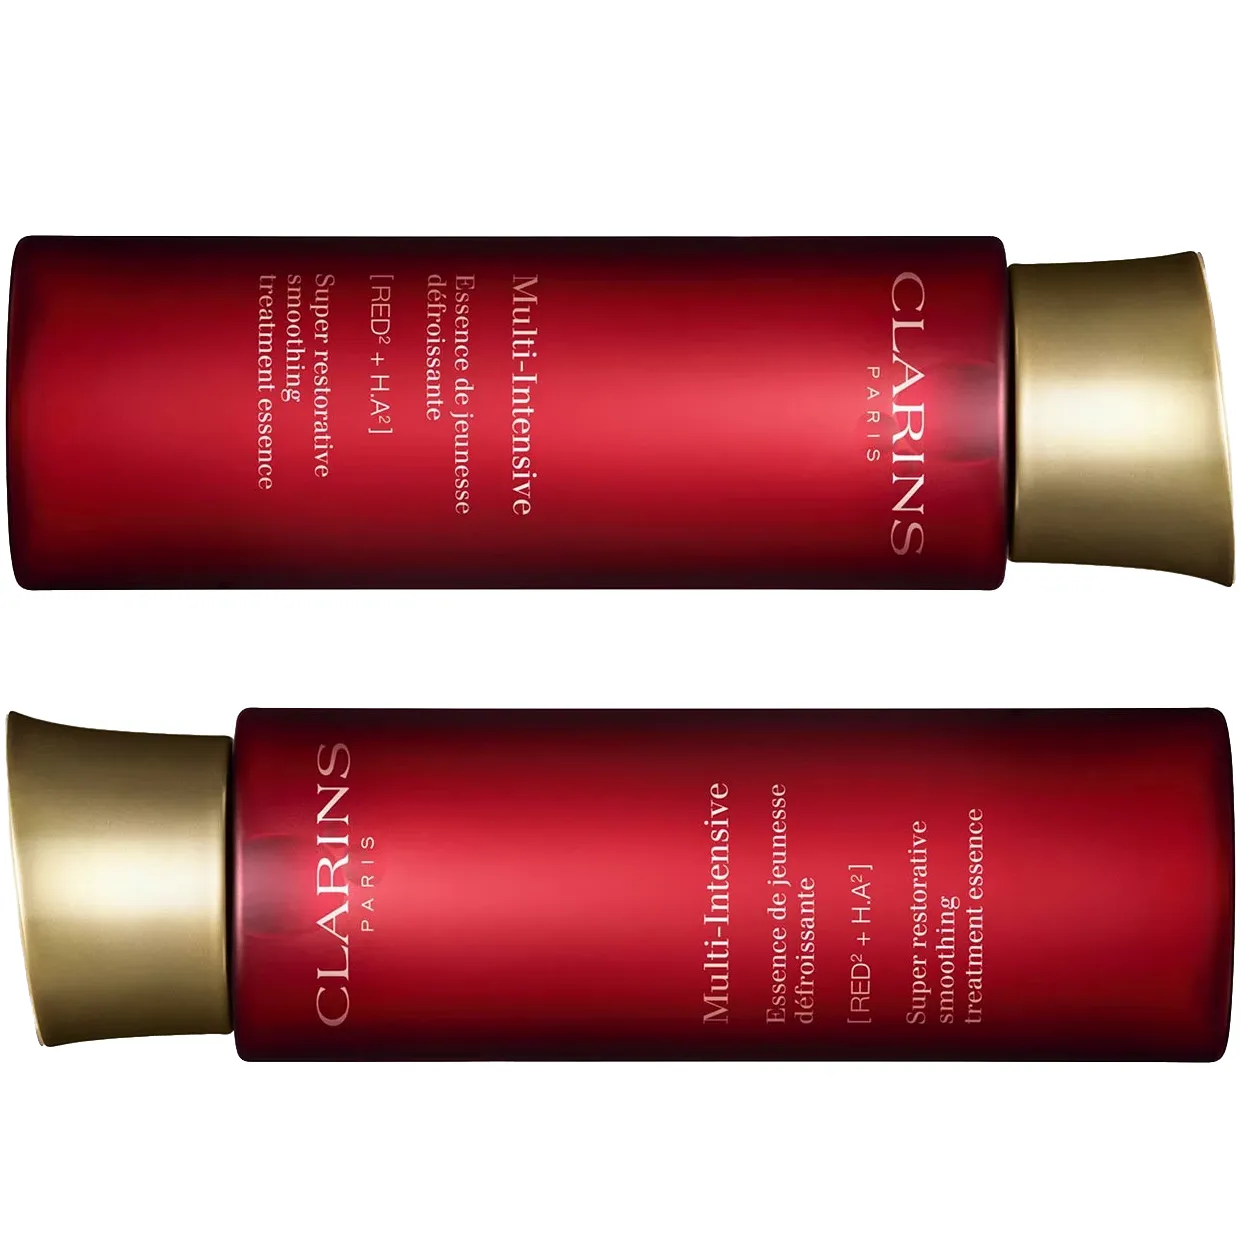 Free Clarins In-store Skincare And Makeup Samples